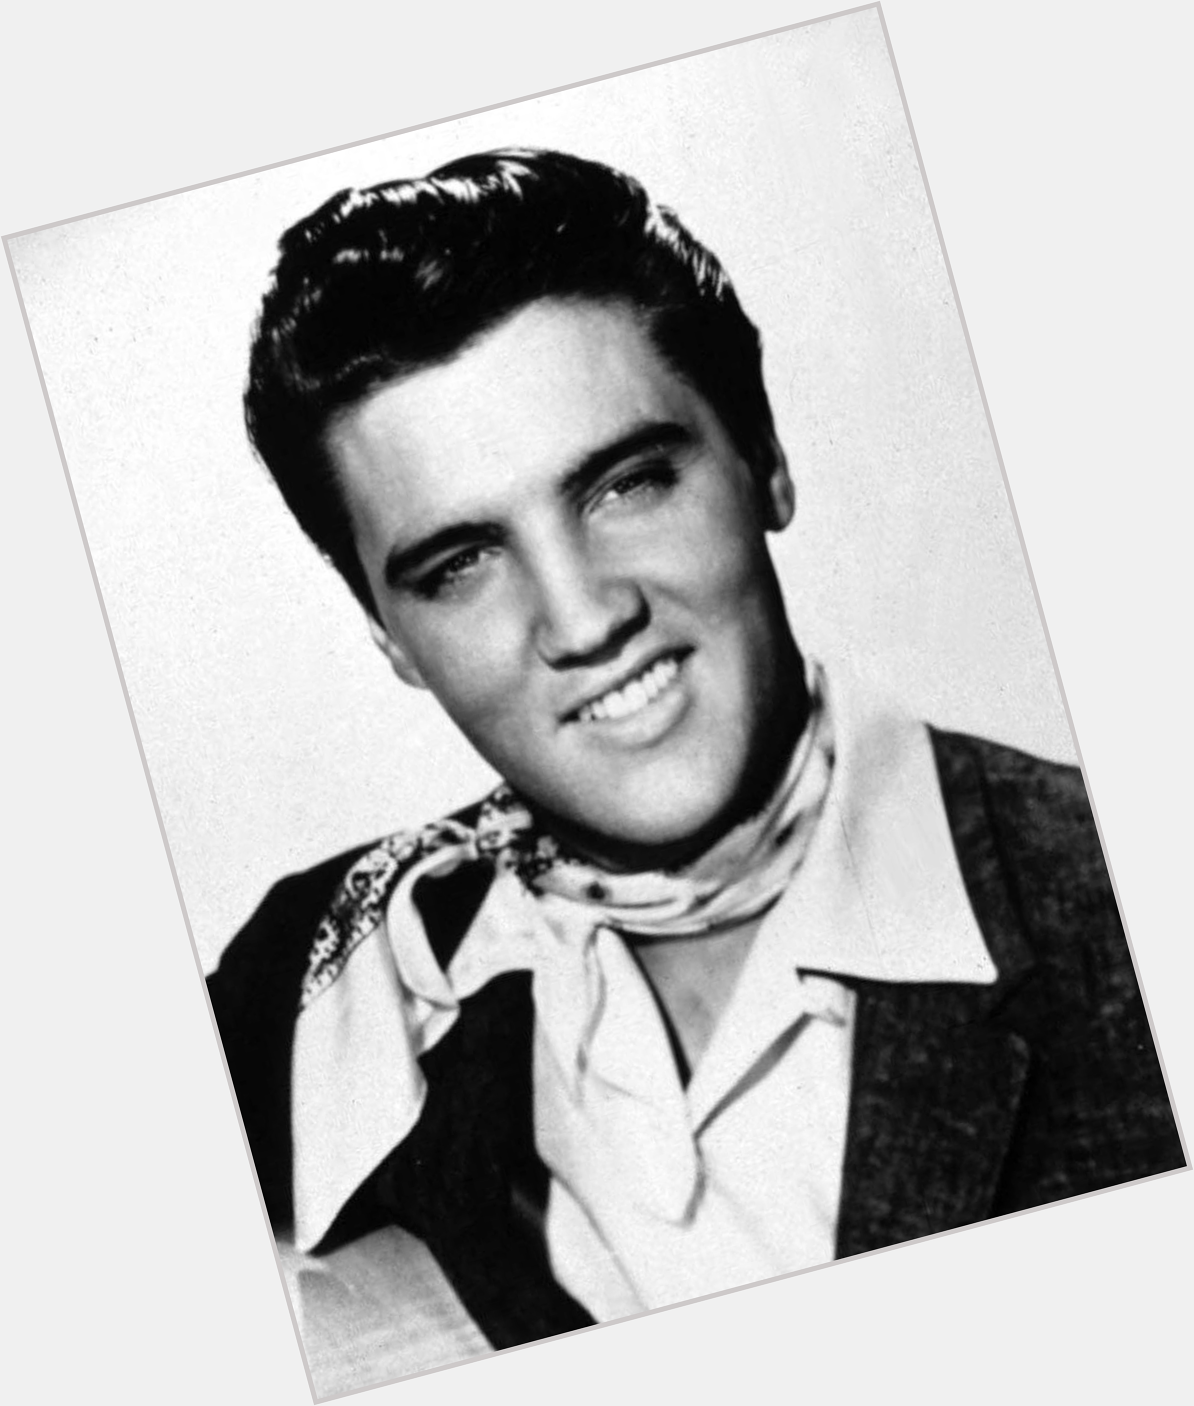 Happy Birthday to the King of Rock and Roll - Elvis Presley! 